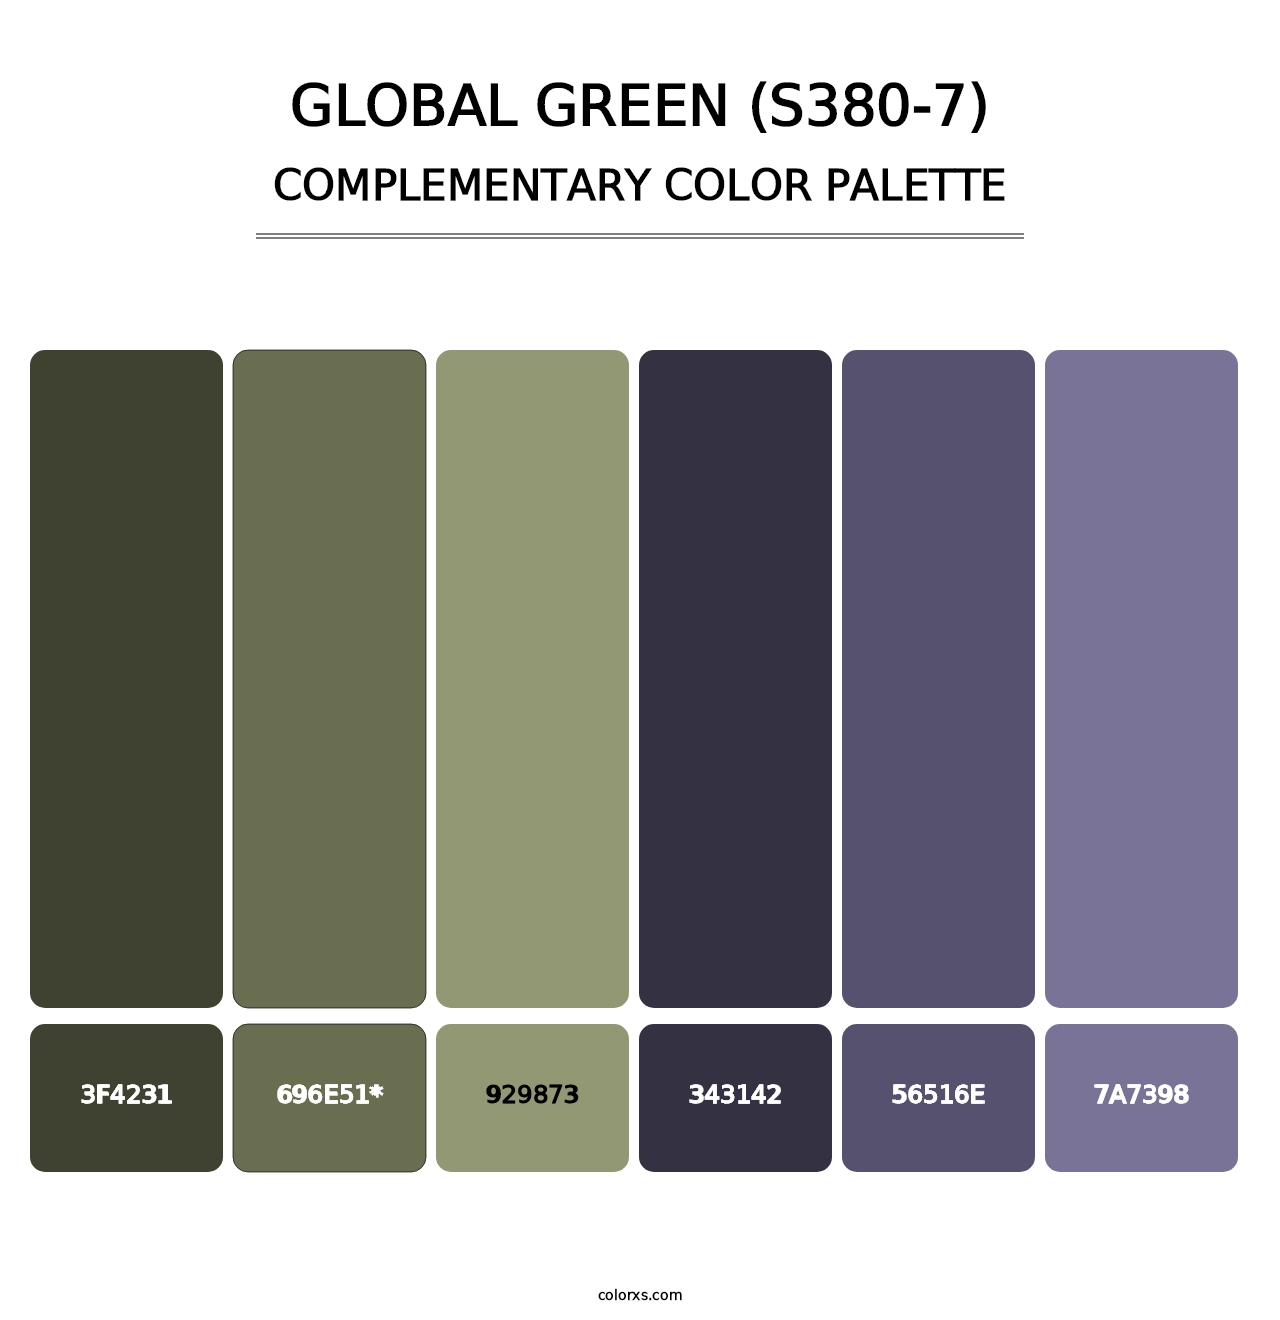 Global Green (S380-7) - Complementary Color Palette